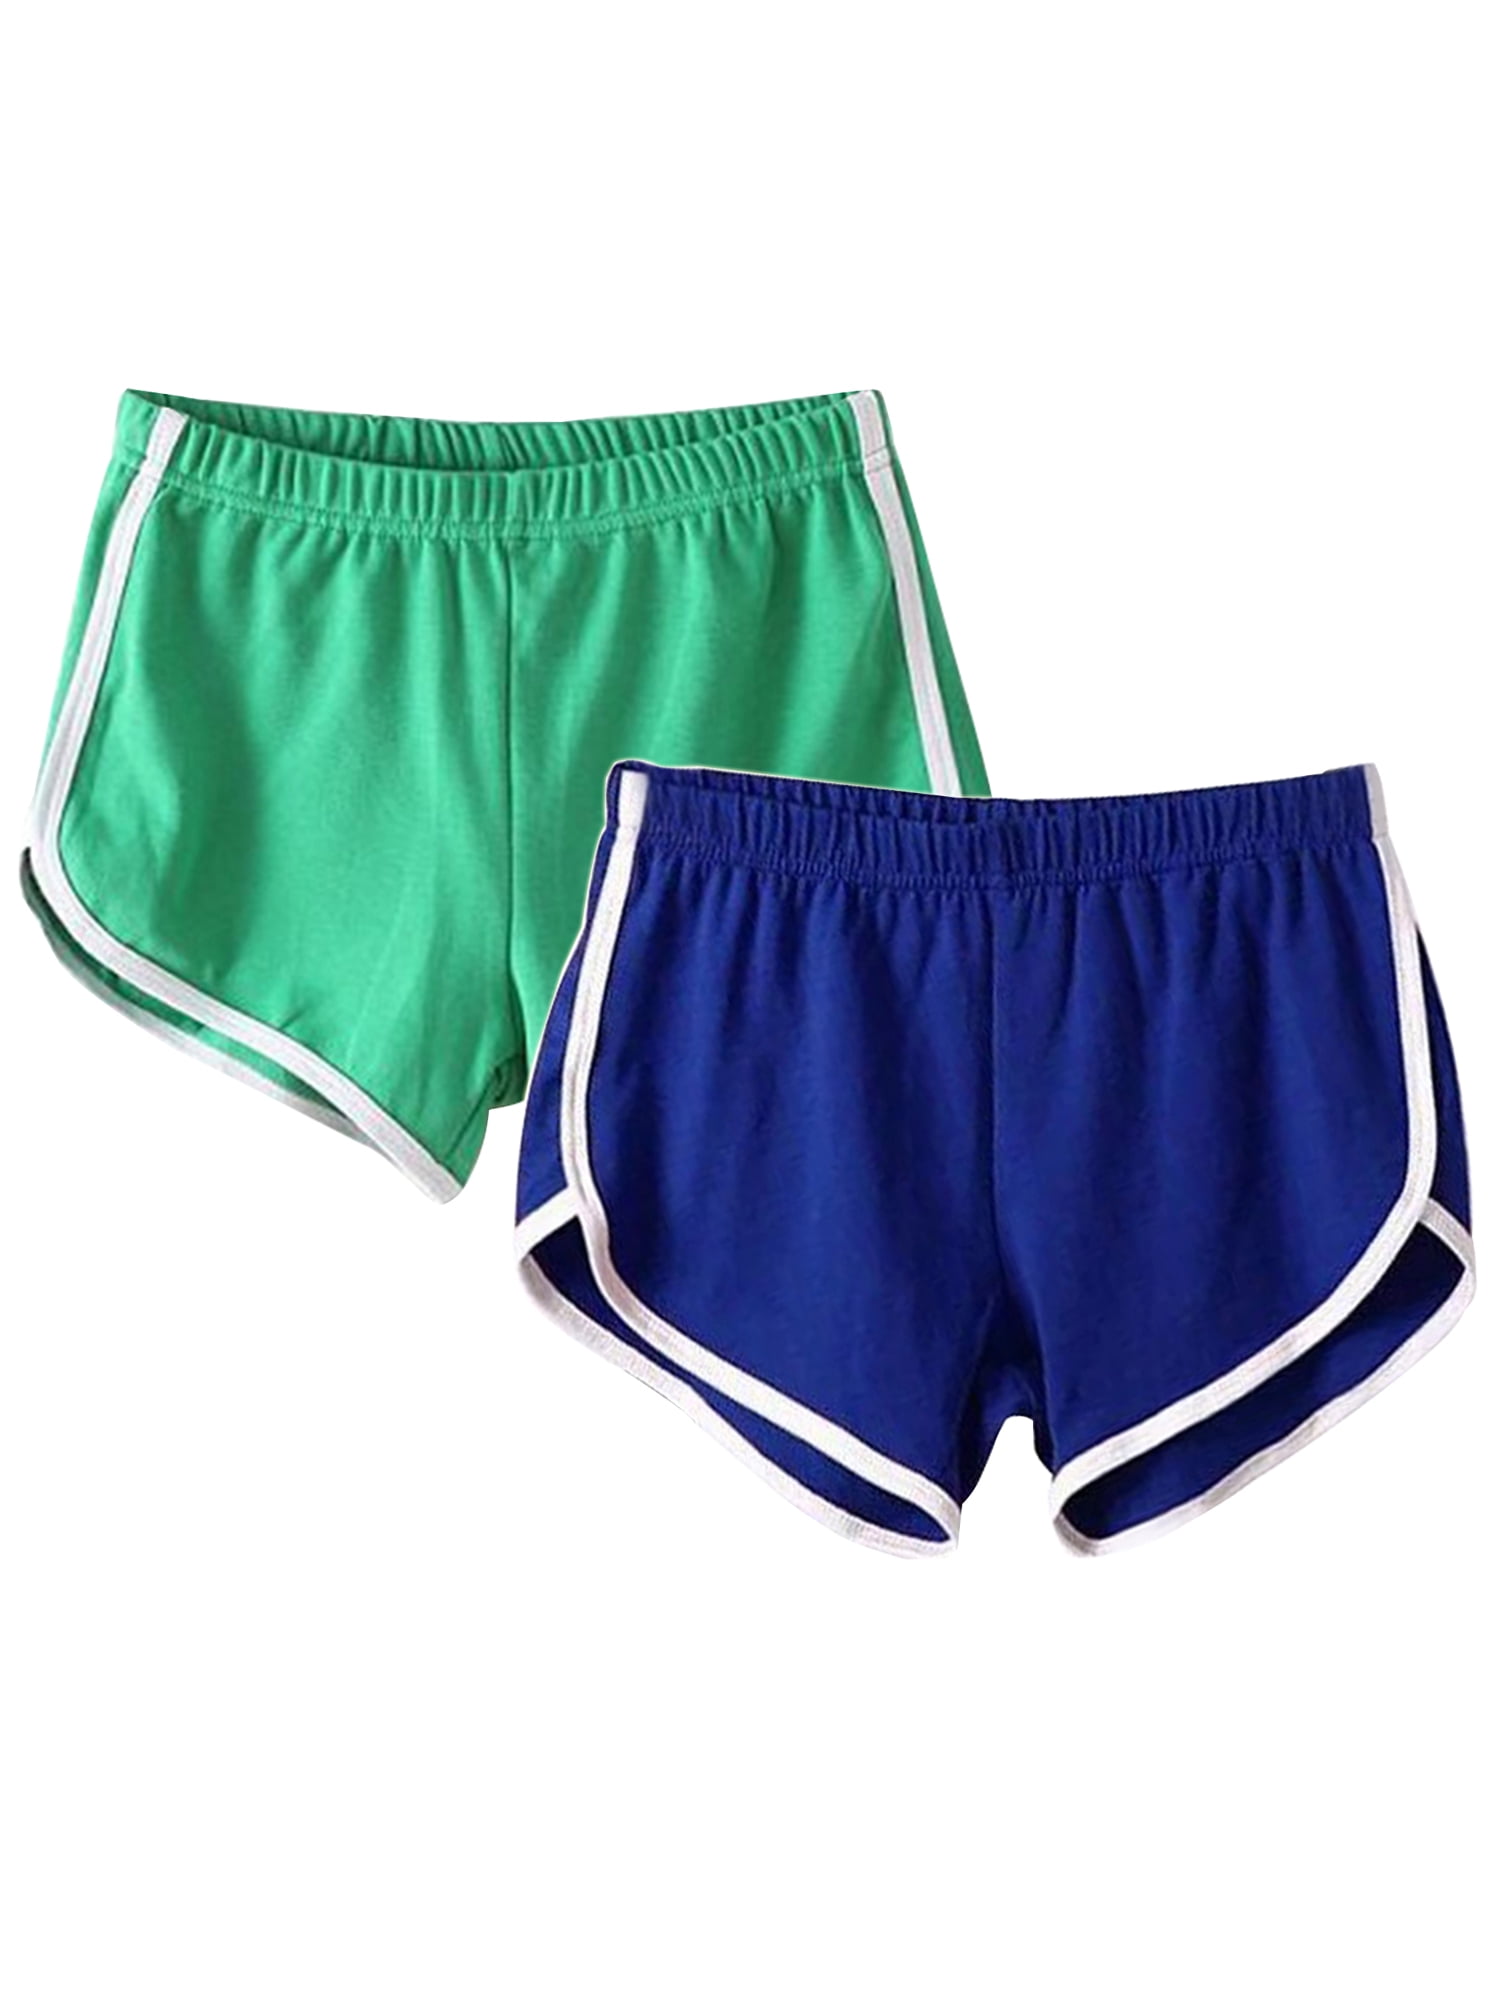 (2 Pack) Women Yoga Shorts Side Striped Fitness Sports Gym